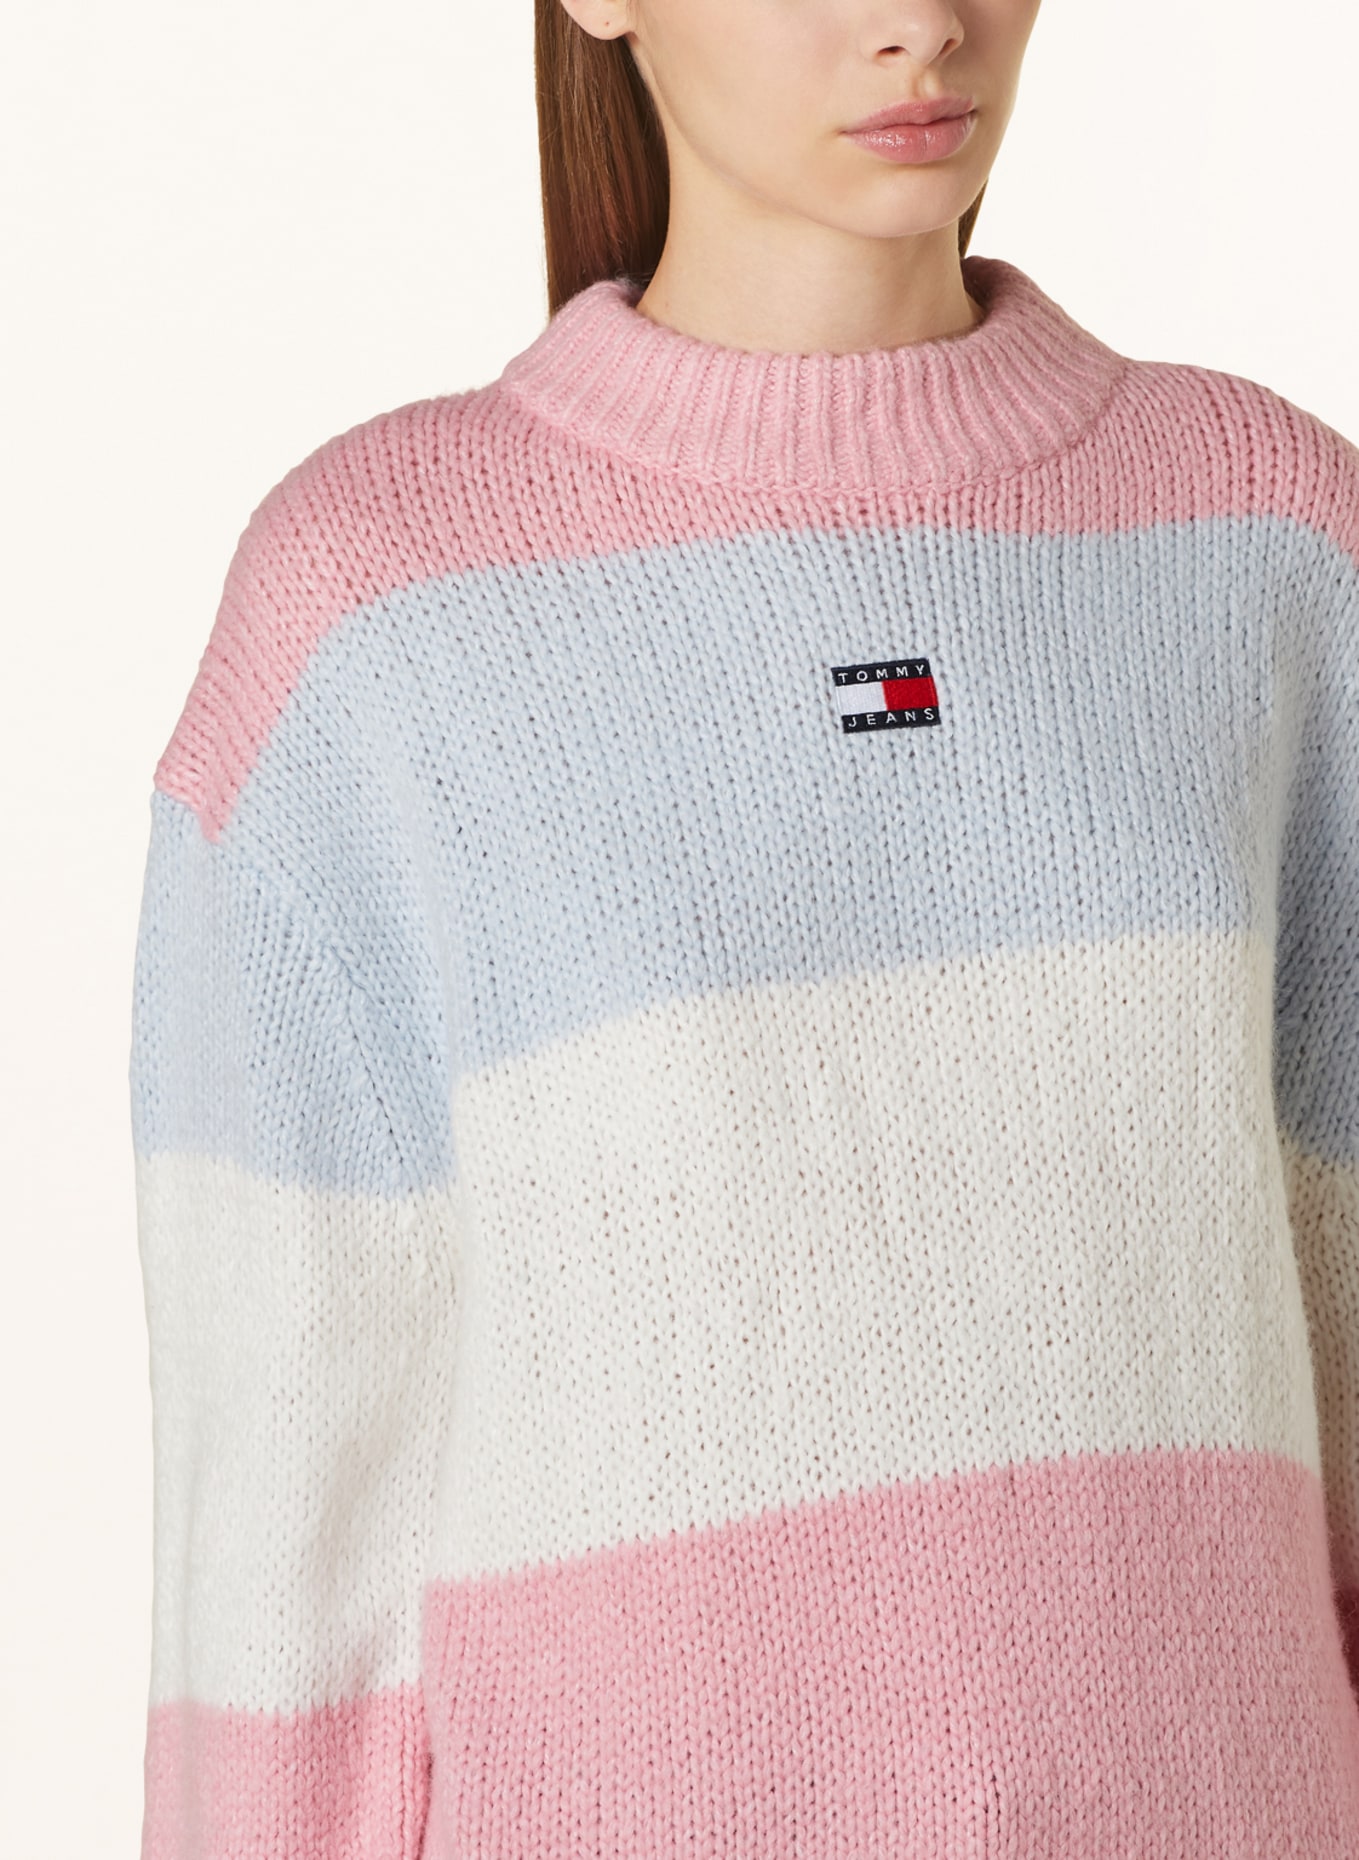 TOMMY JEANS Pullover, Farbe: ROSA/ HELLBLAU/ WEISS (Bild 4)